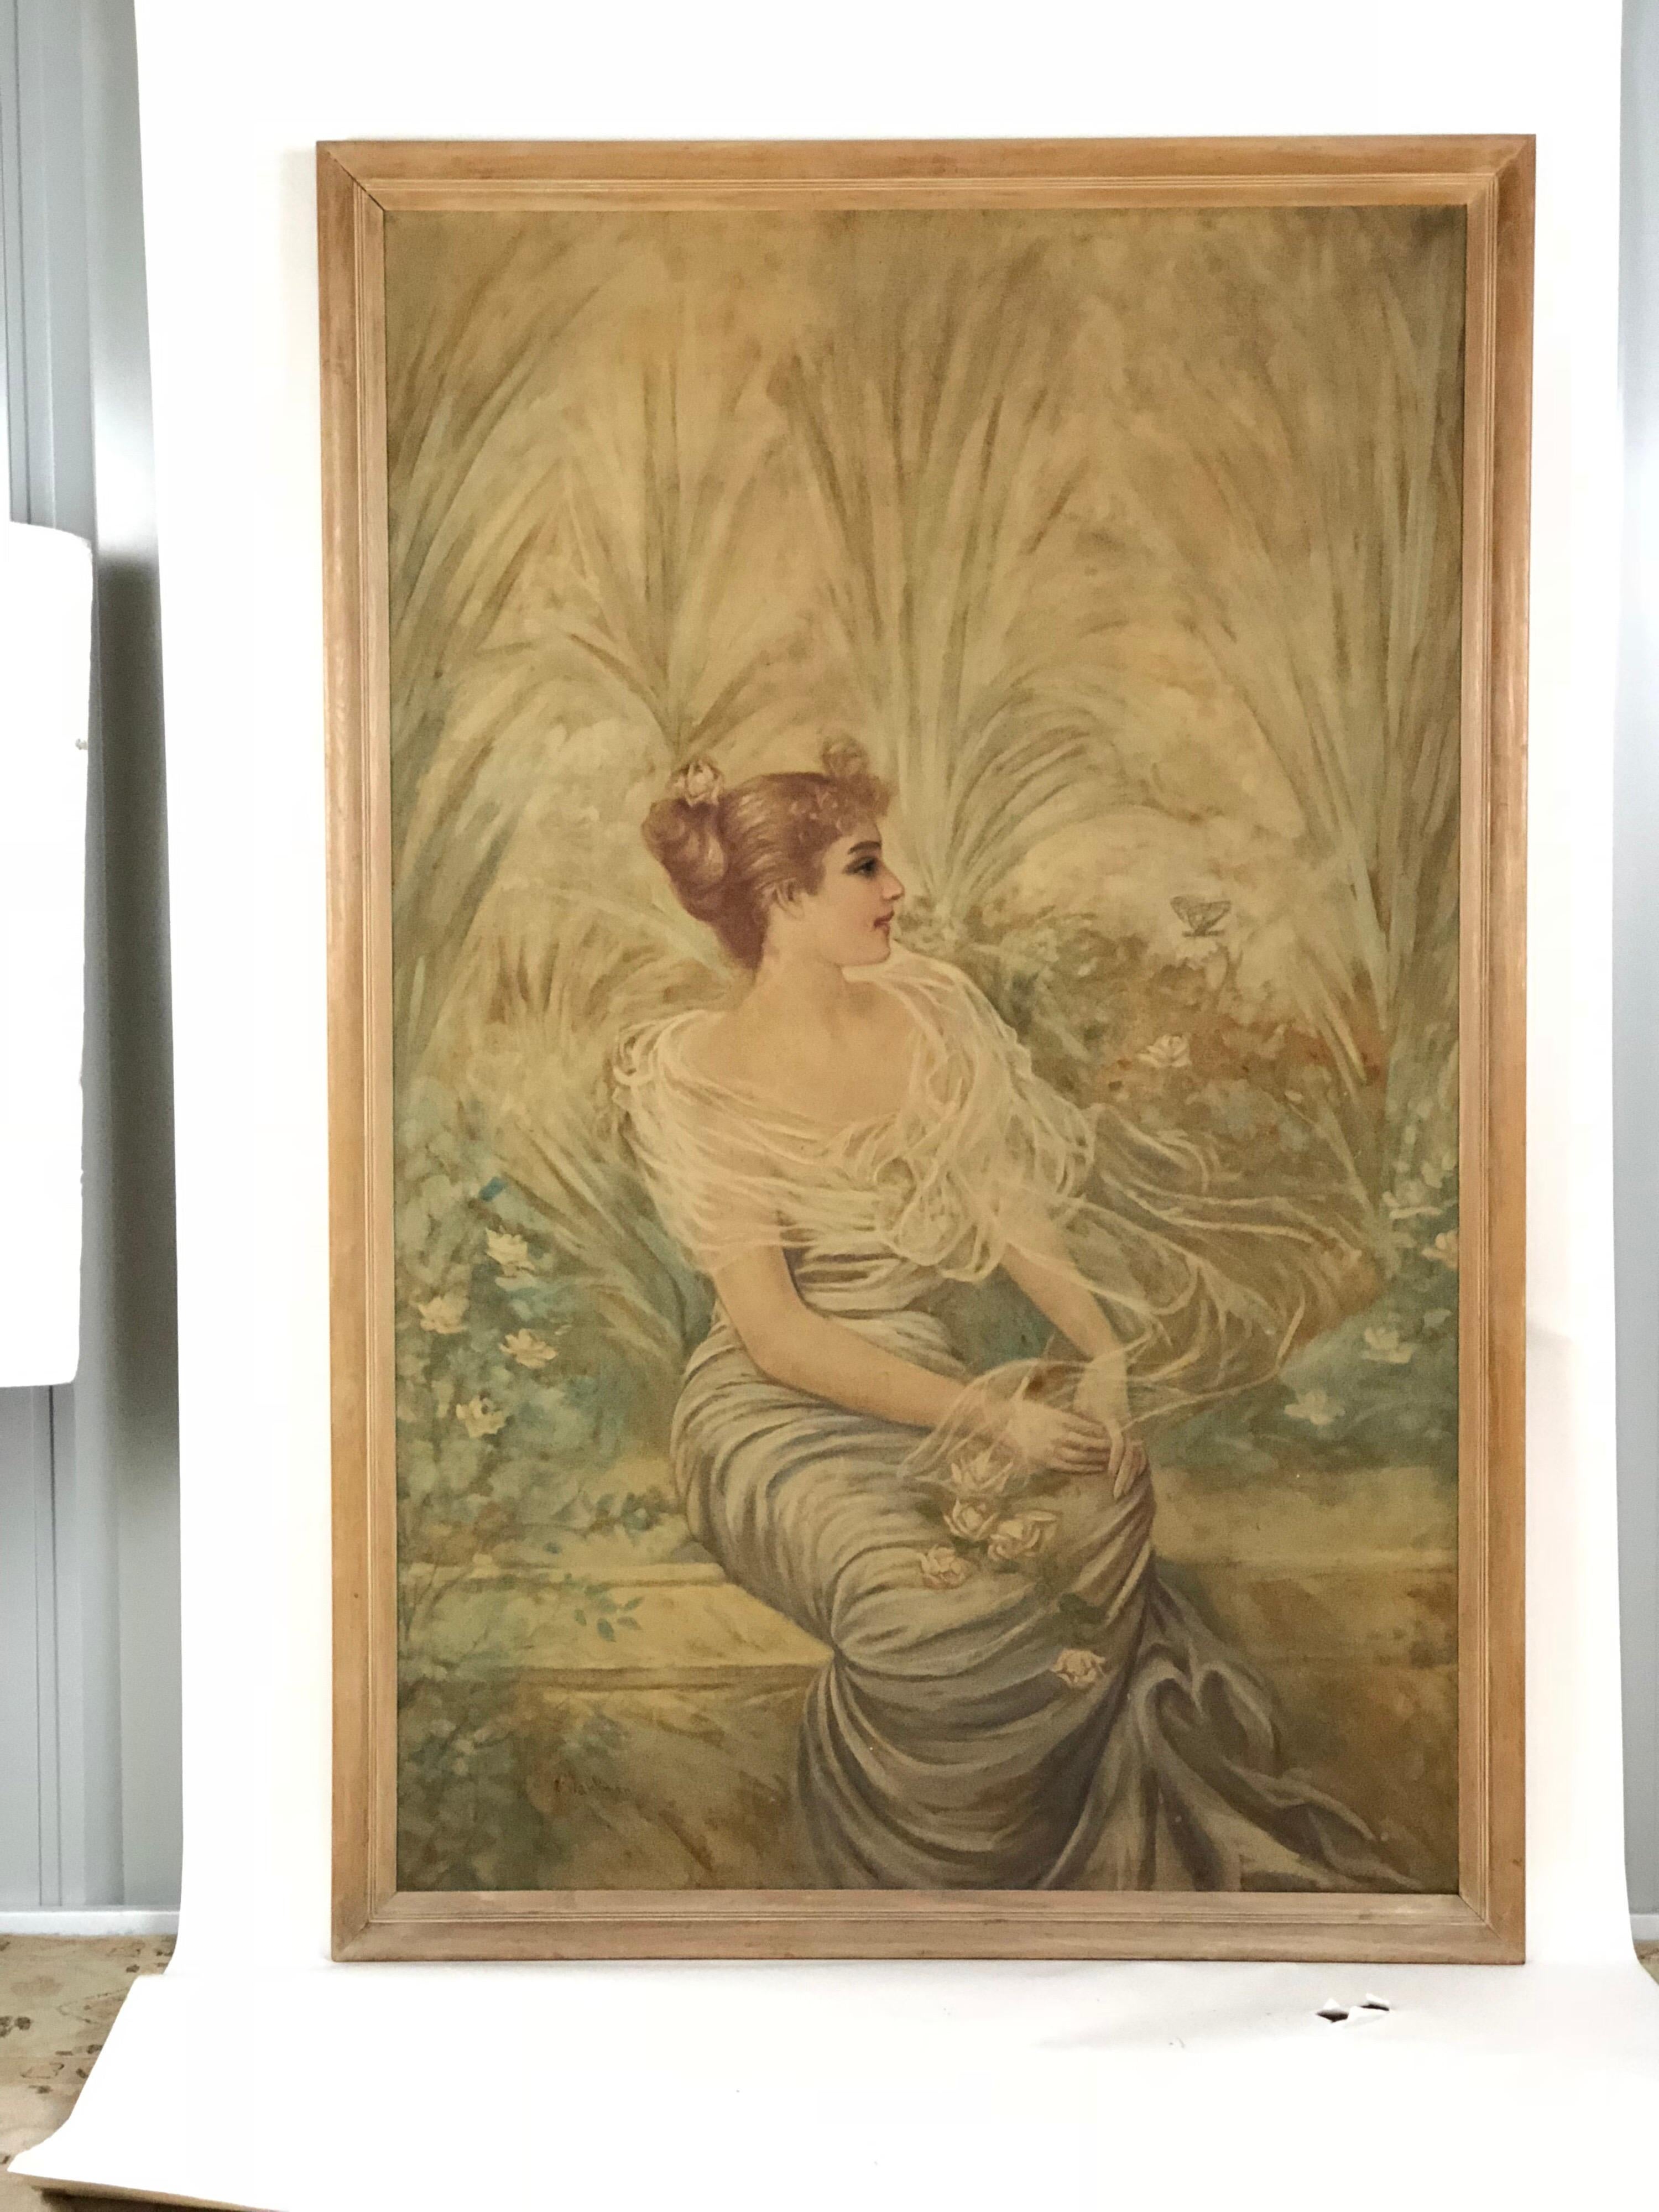 Late 19th or early 20th century garden portrait of a lady painted in the period of Art Nouveau. Stylized palms serve as an elegant backdrop for a seated heiress painted in soft pastels and surrounded by flora. The painting is signed Blankman lower